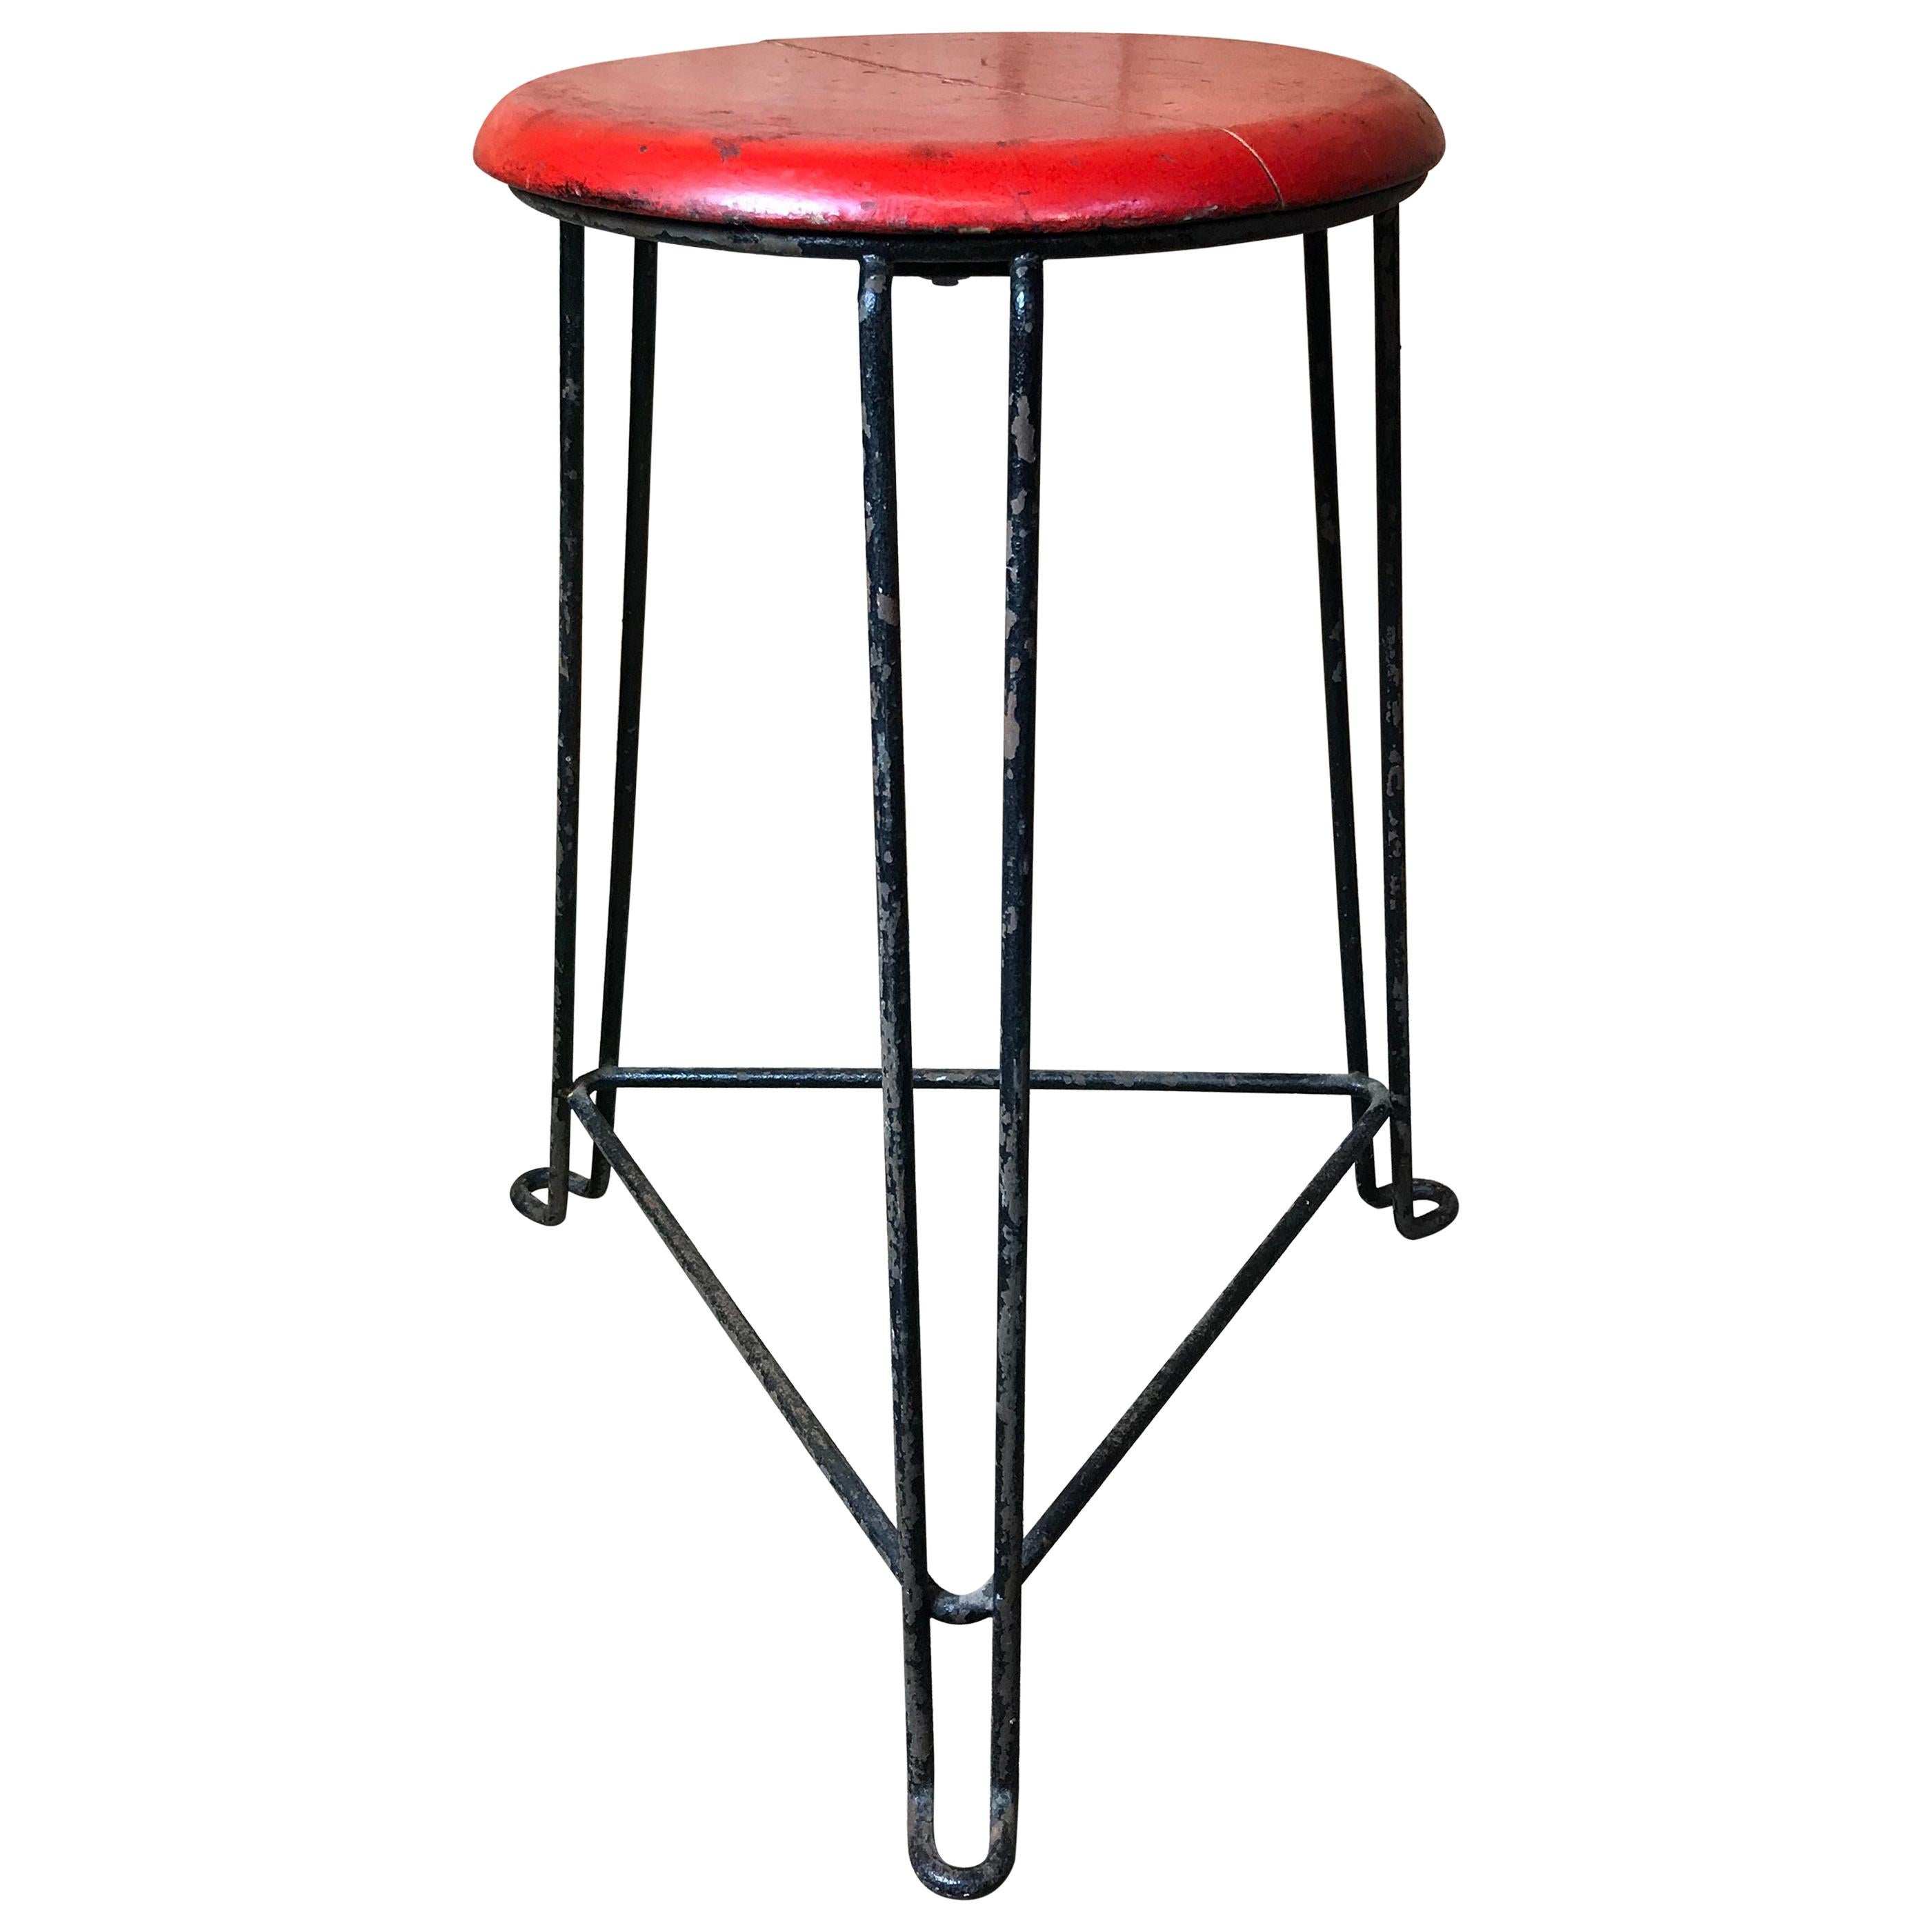 Retro 1960s Wooden Seat with Metal Frame Tomado Stool 'Red Seat' For Sale